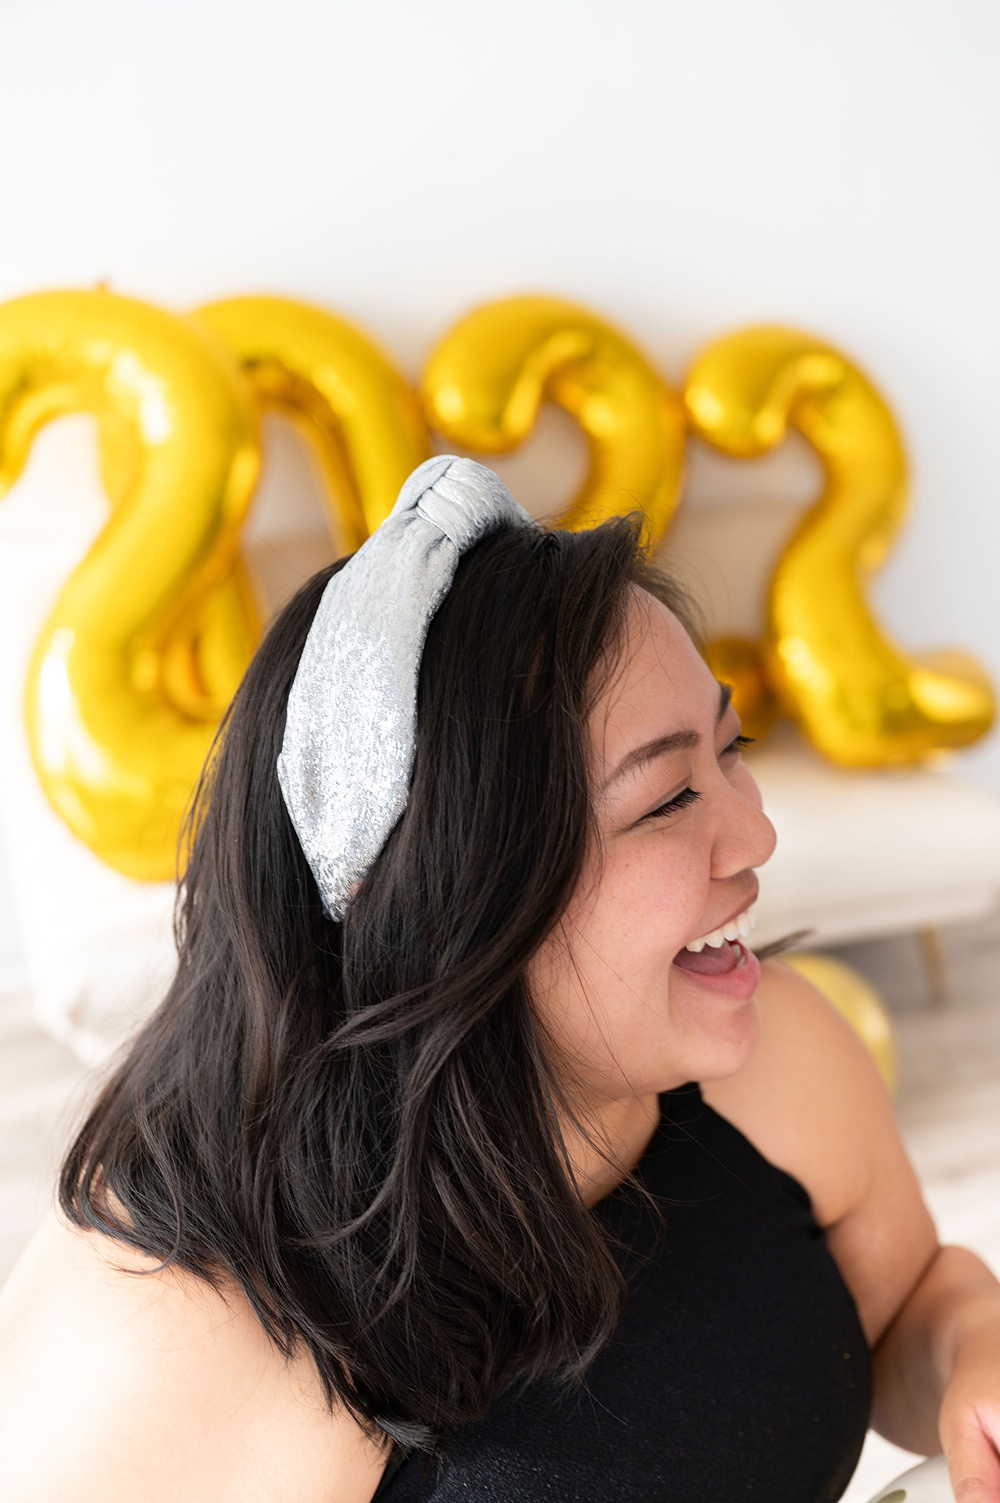 A smiling woman wearing a gold headband and celebrating new year 2022. She's looking to the right.